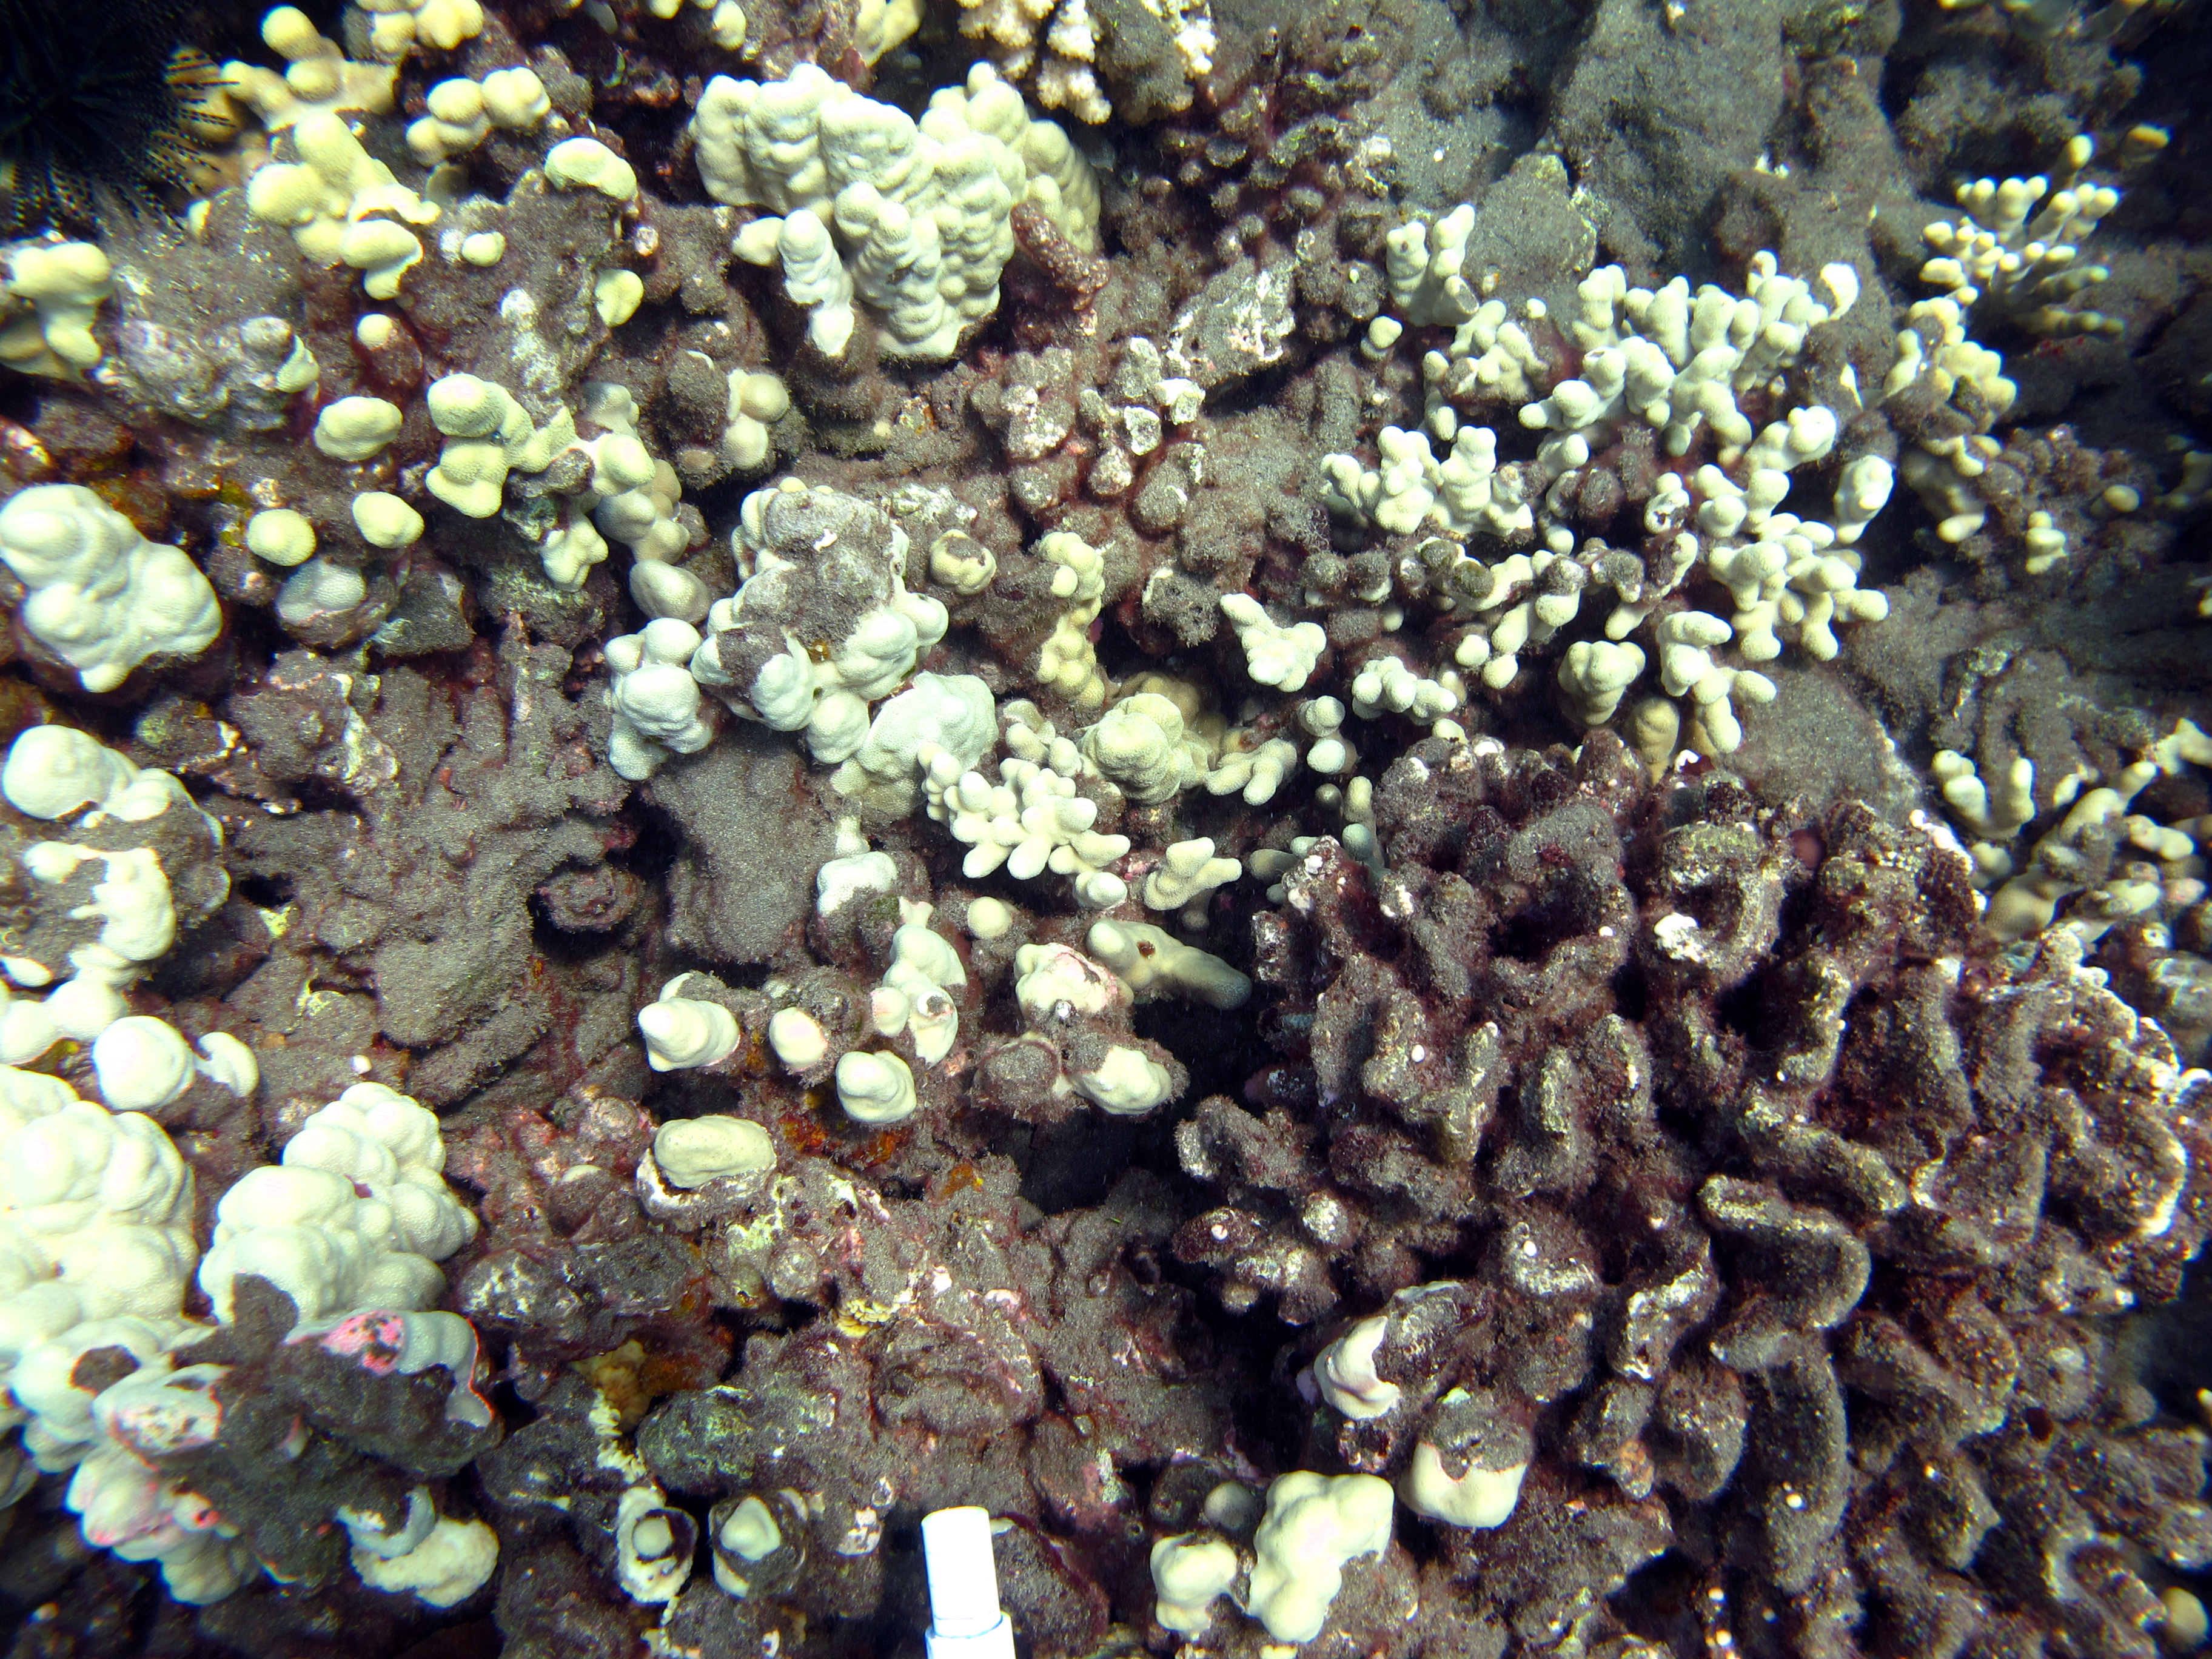 Corals that are bleached or covered in sediment.